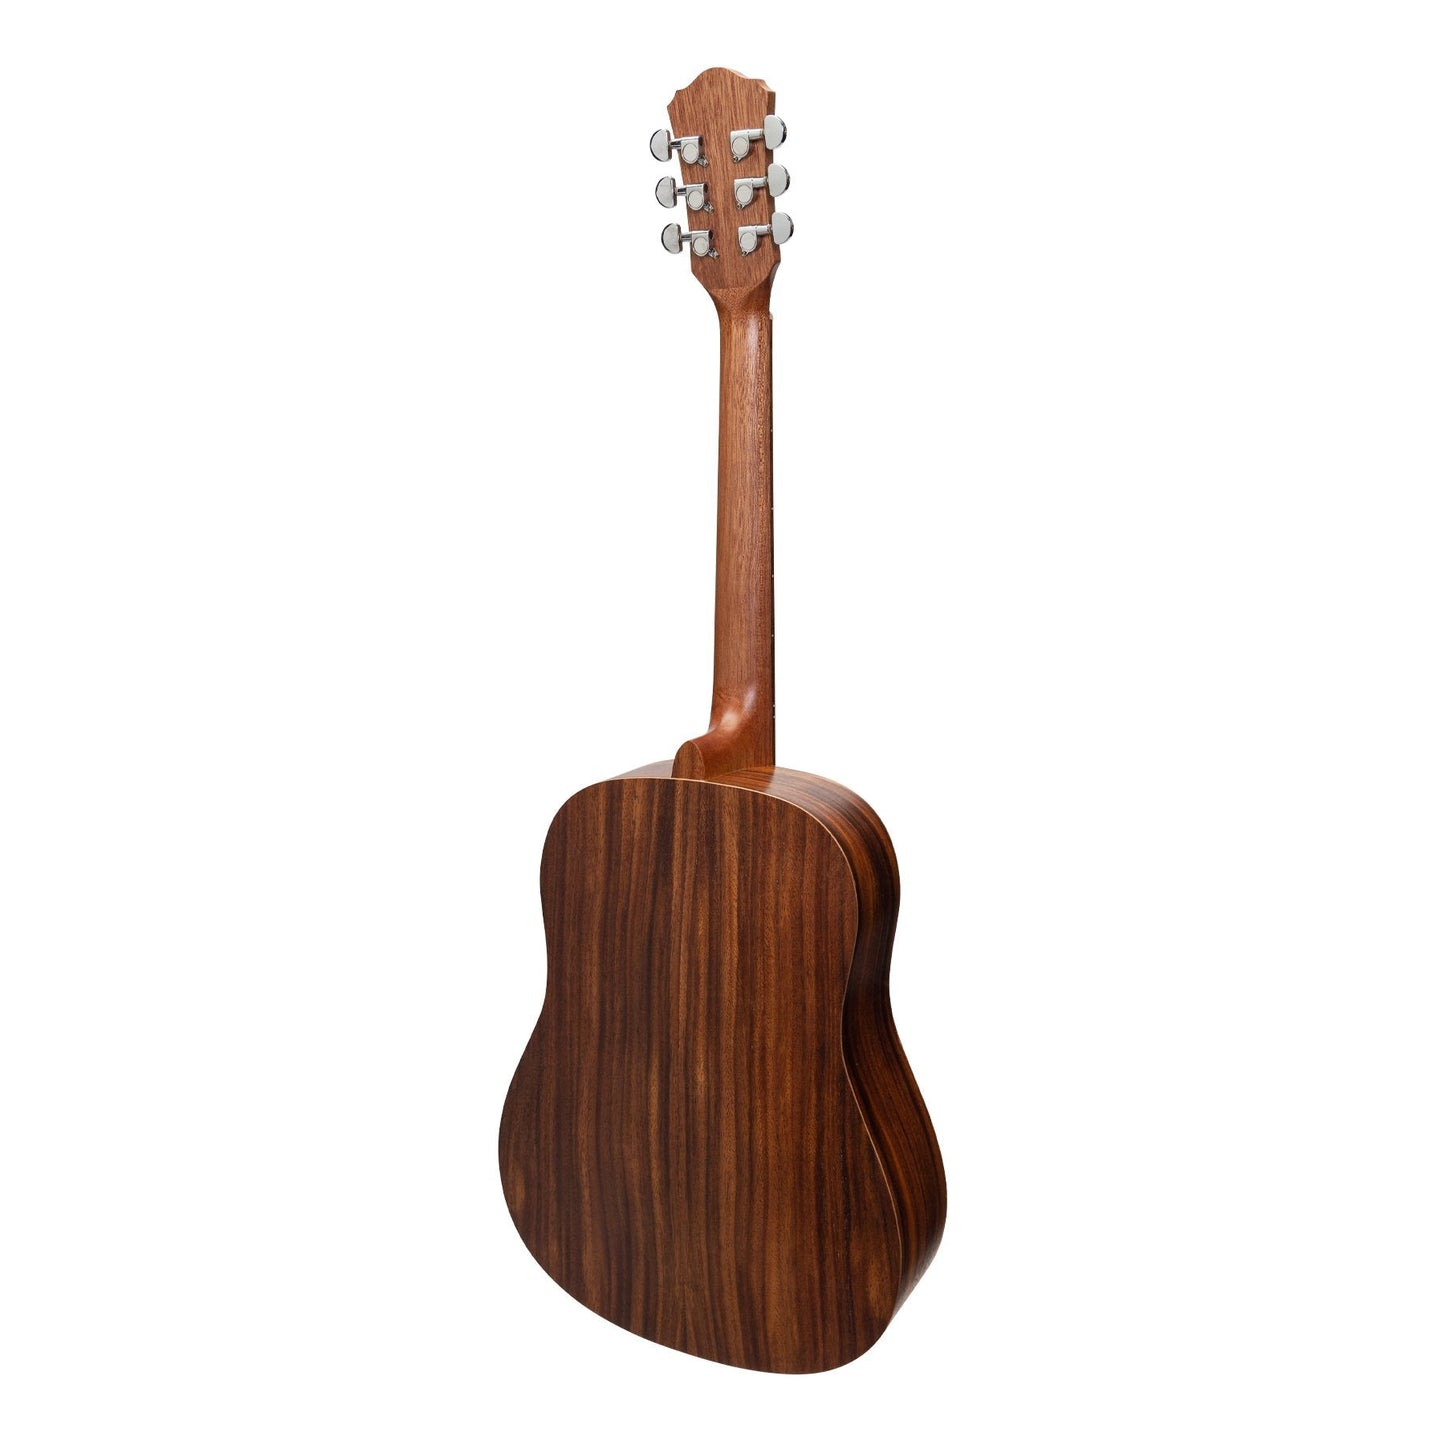 Martinez Acoustic-Electric Middy Traveller Guitar (Rosewood)